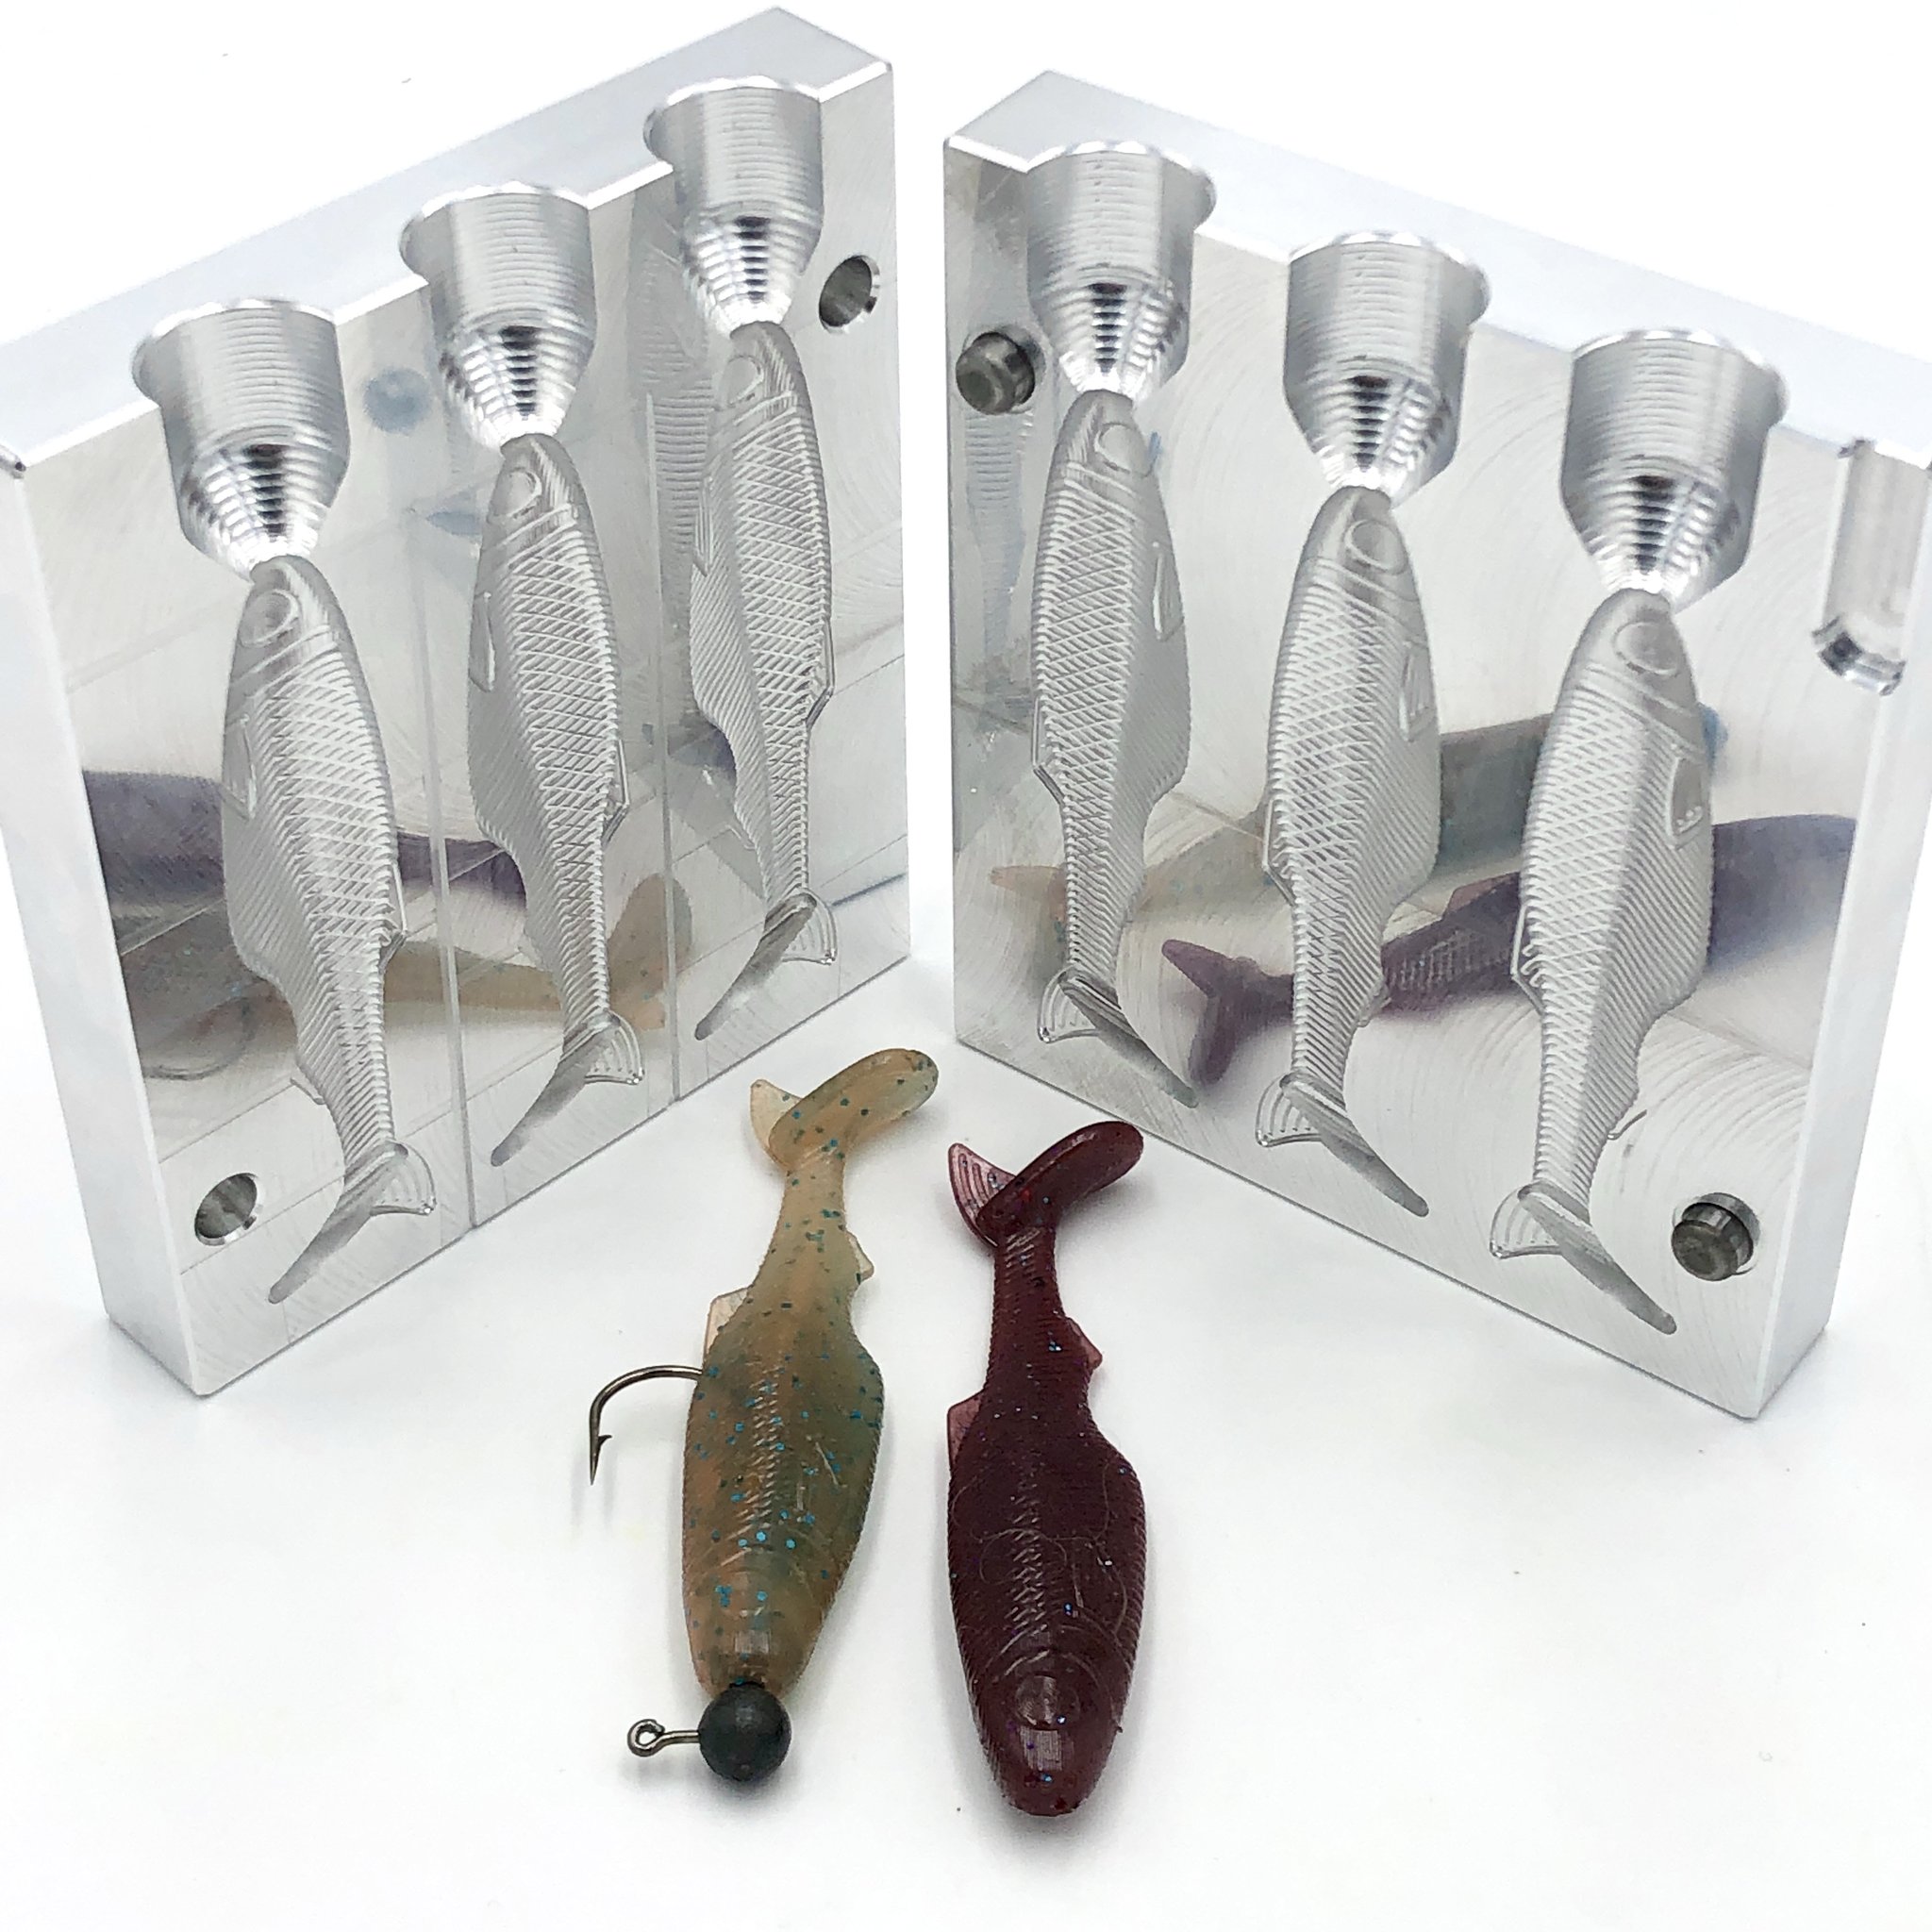 Ice Fishing Plastic Molds Photos and Images & Pictures